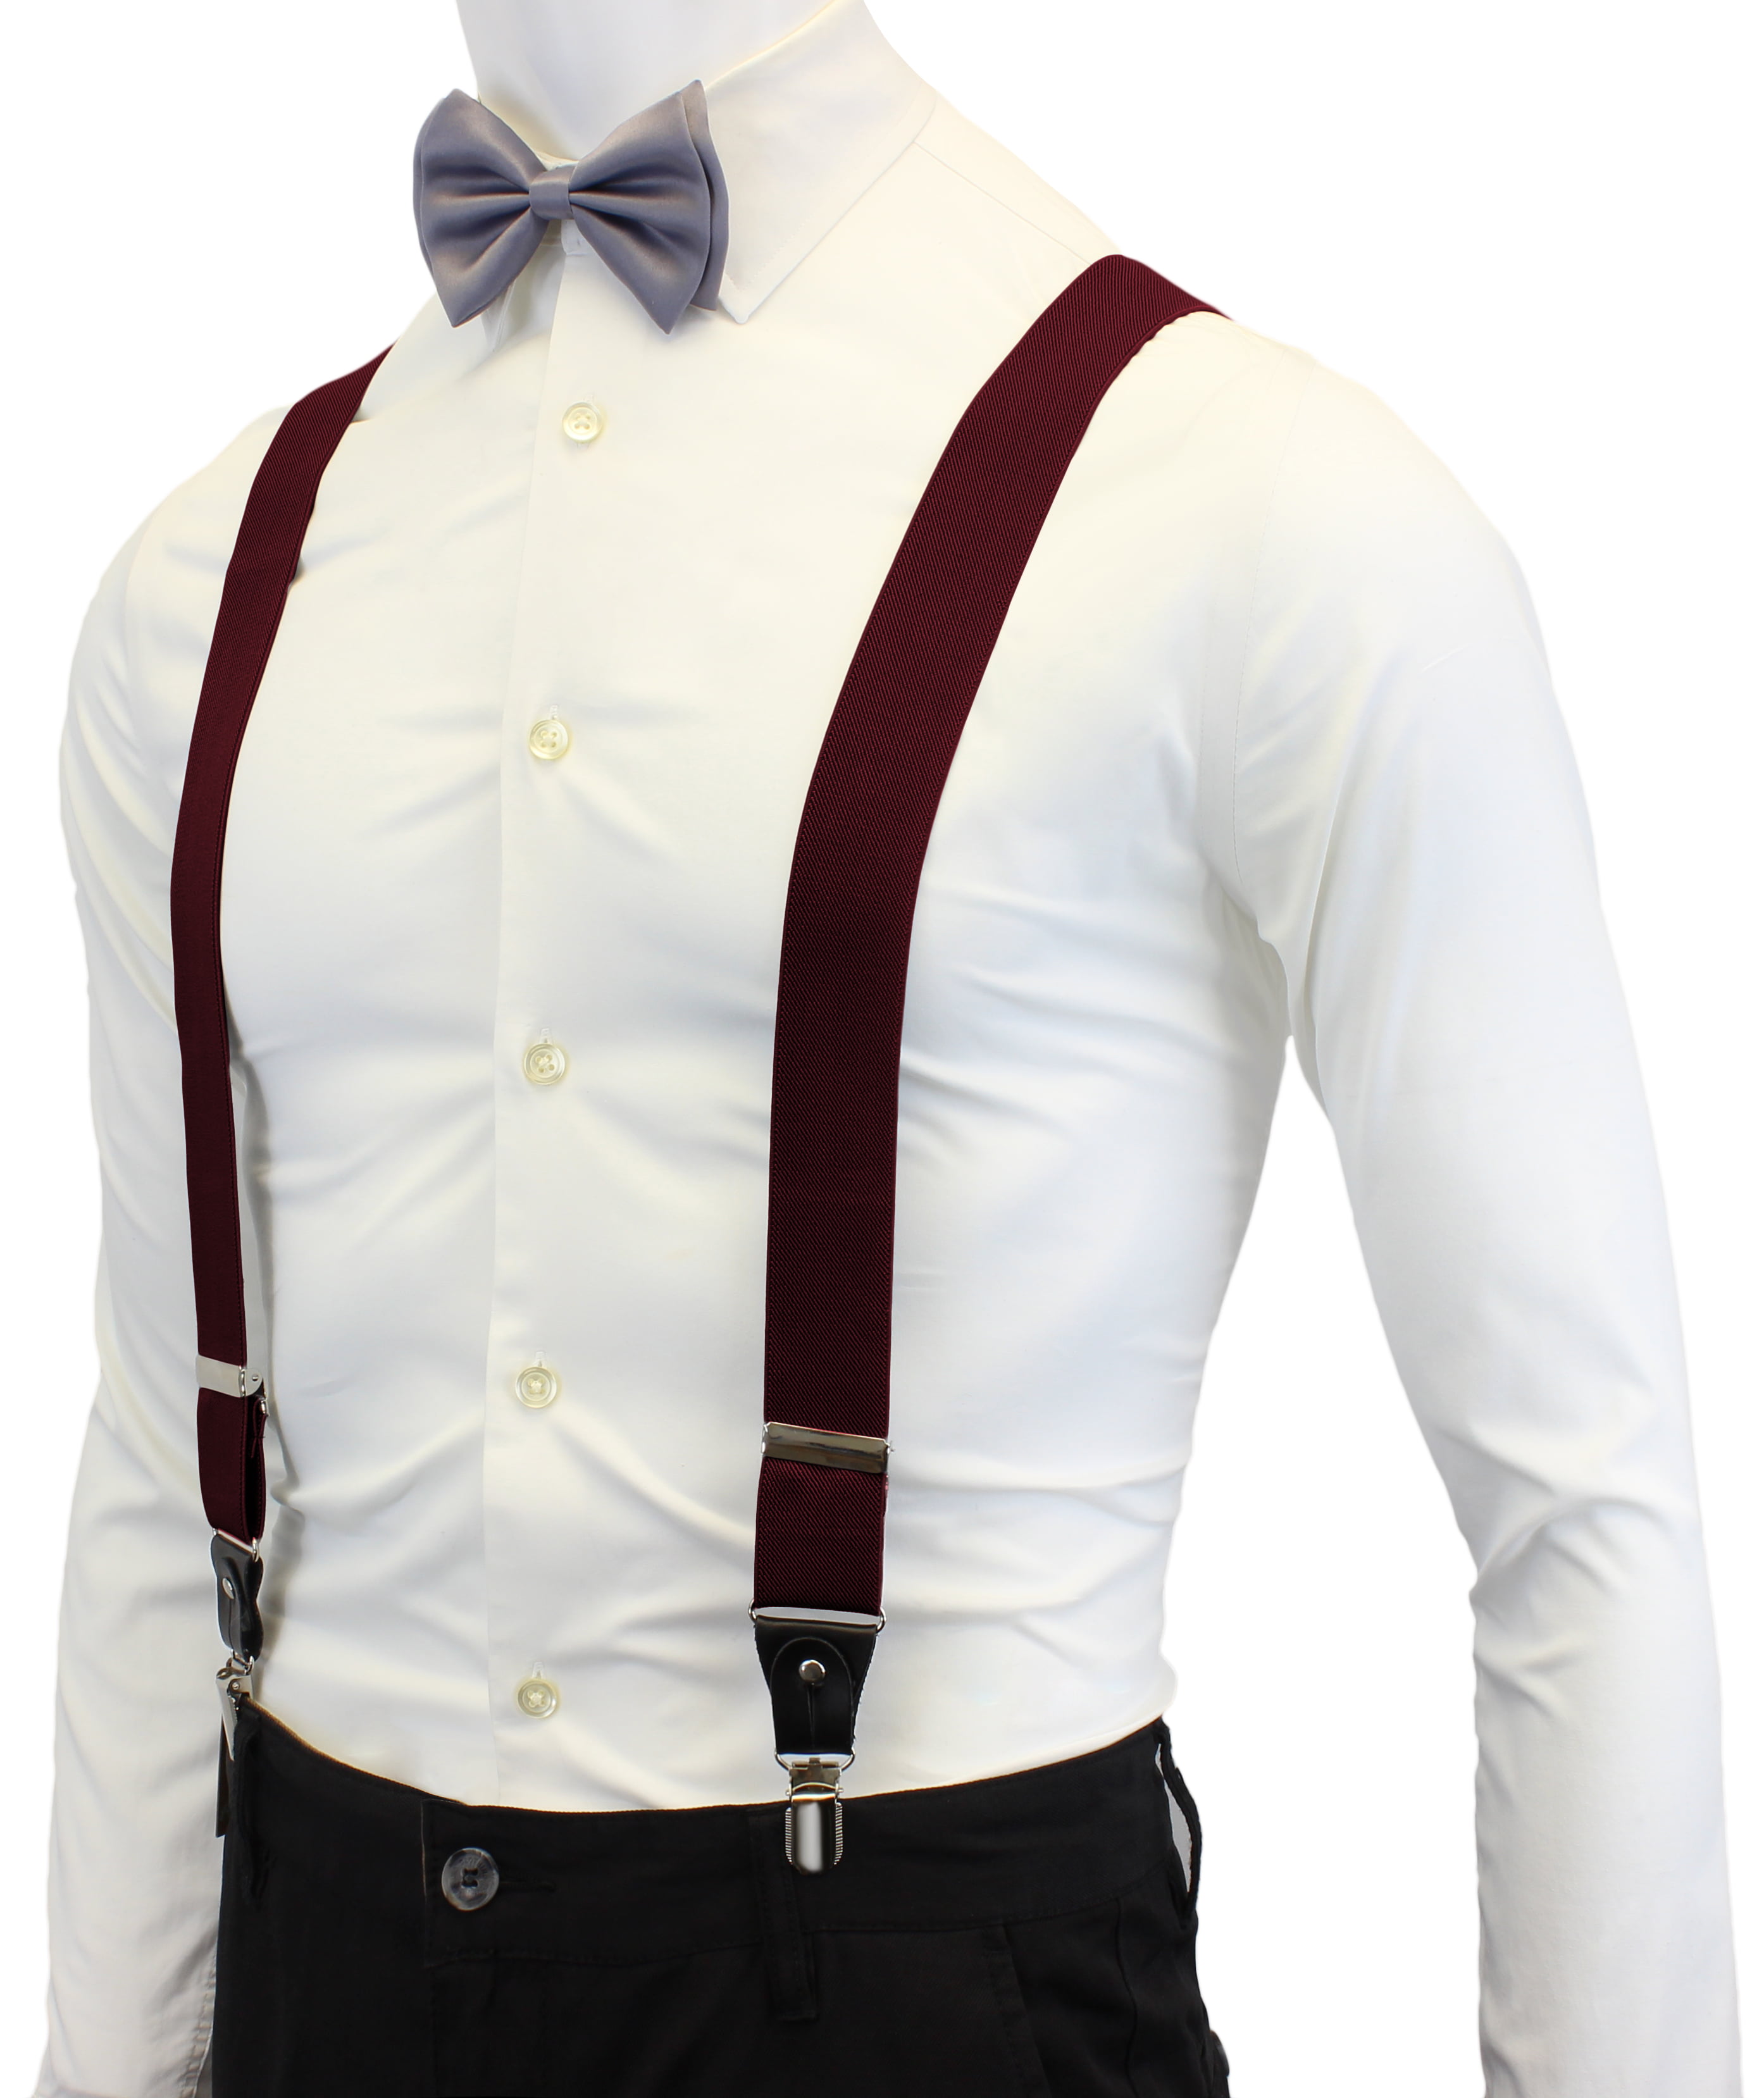 AISENIN Suspenders for Men with Hooks Big & Tall Elastic Solid Color Y-Back Suspender 